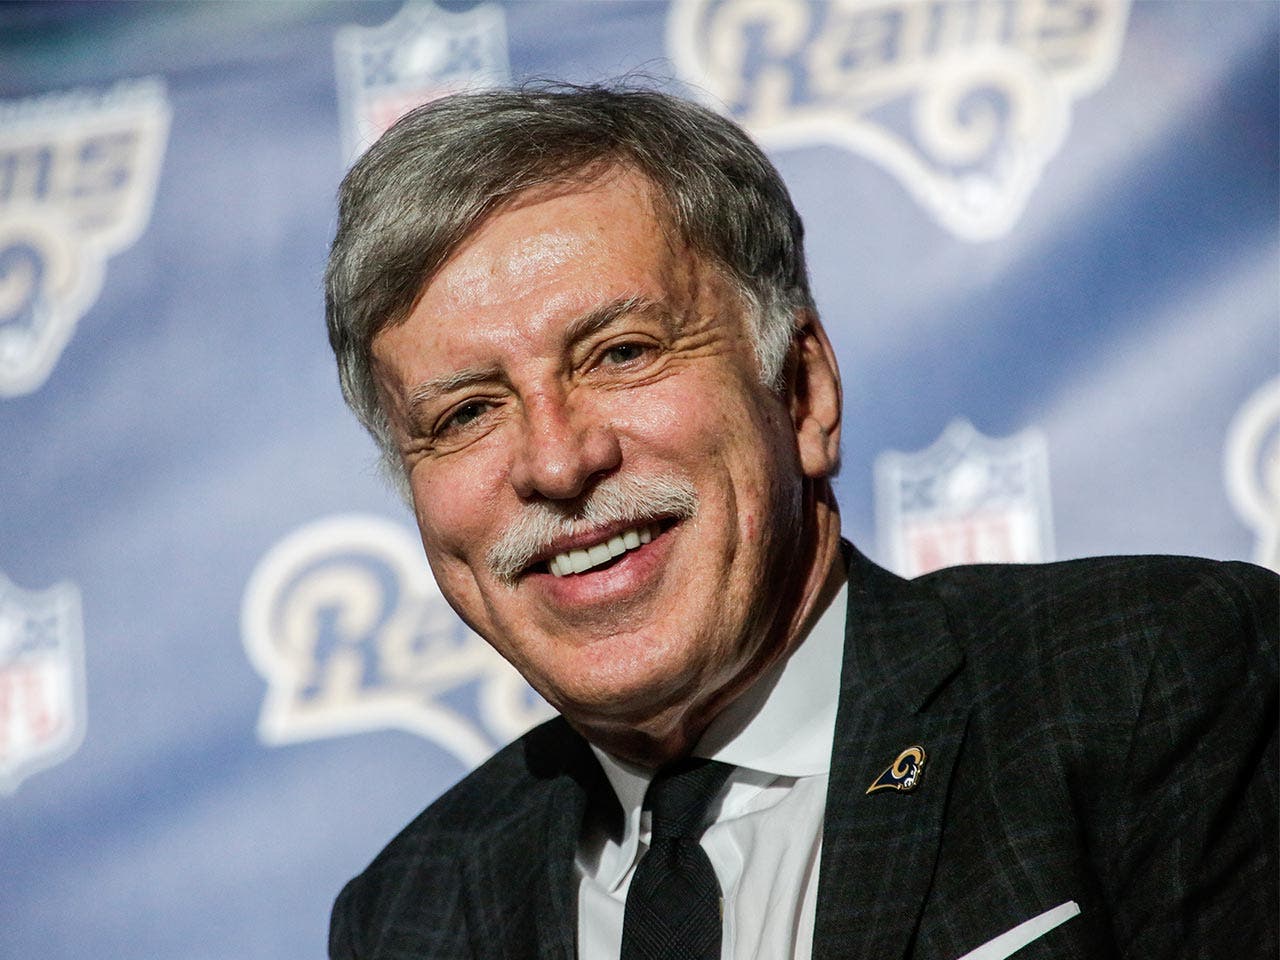 The 7 richest NFL team owners